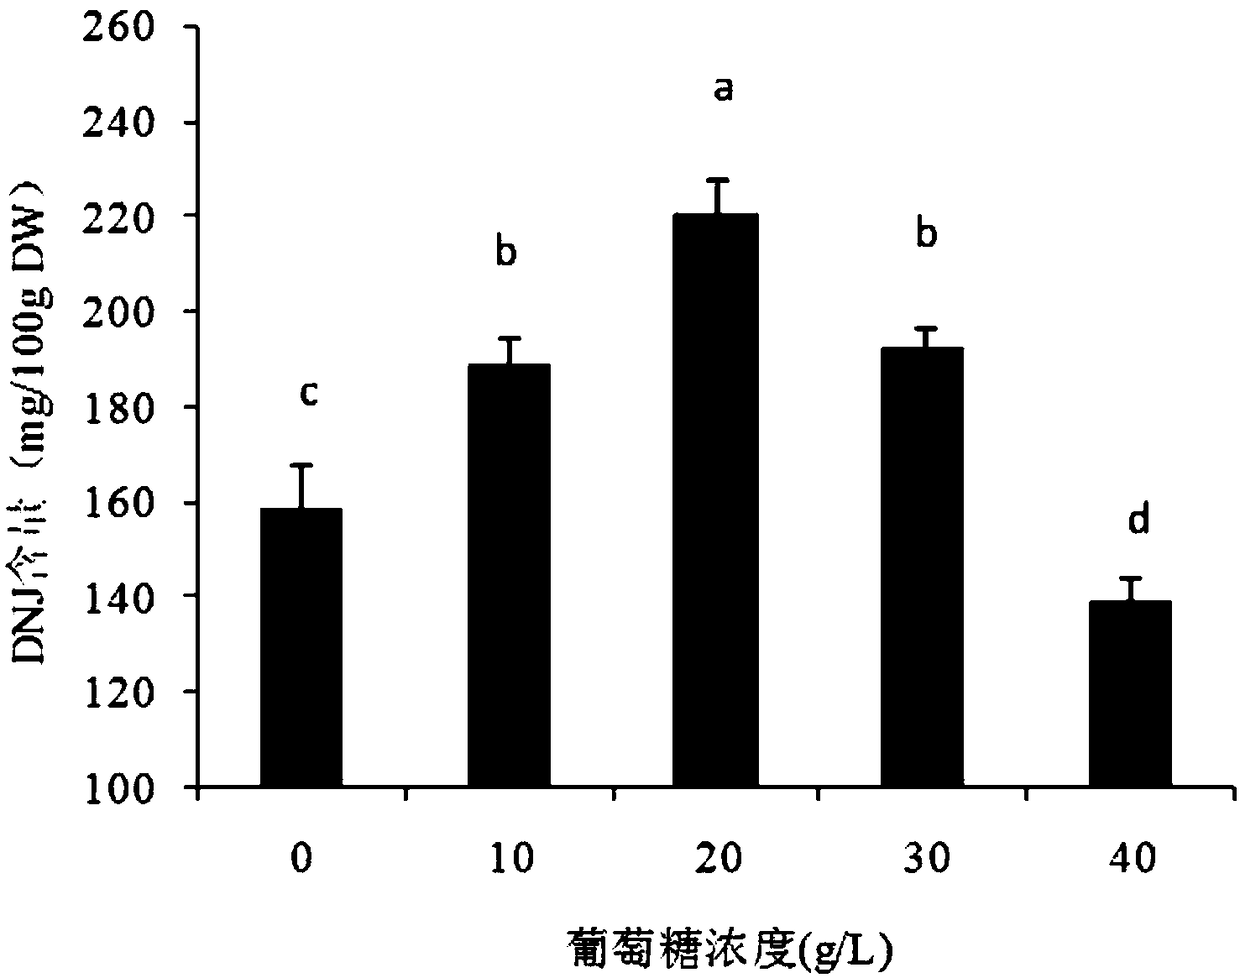 A method for enriching 1-deoxynojirimycin in mulberry leaves and the obtained ultrafine powder